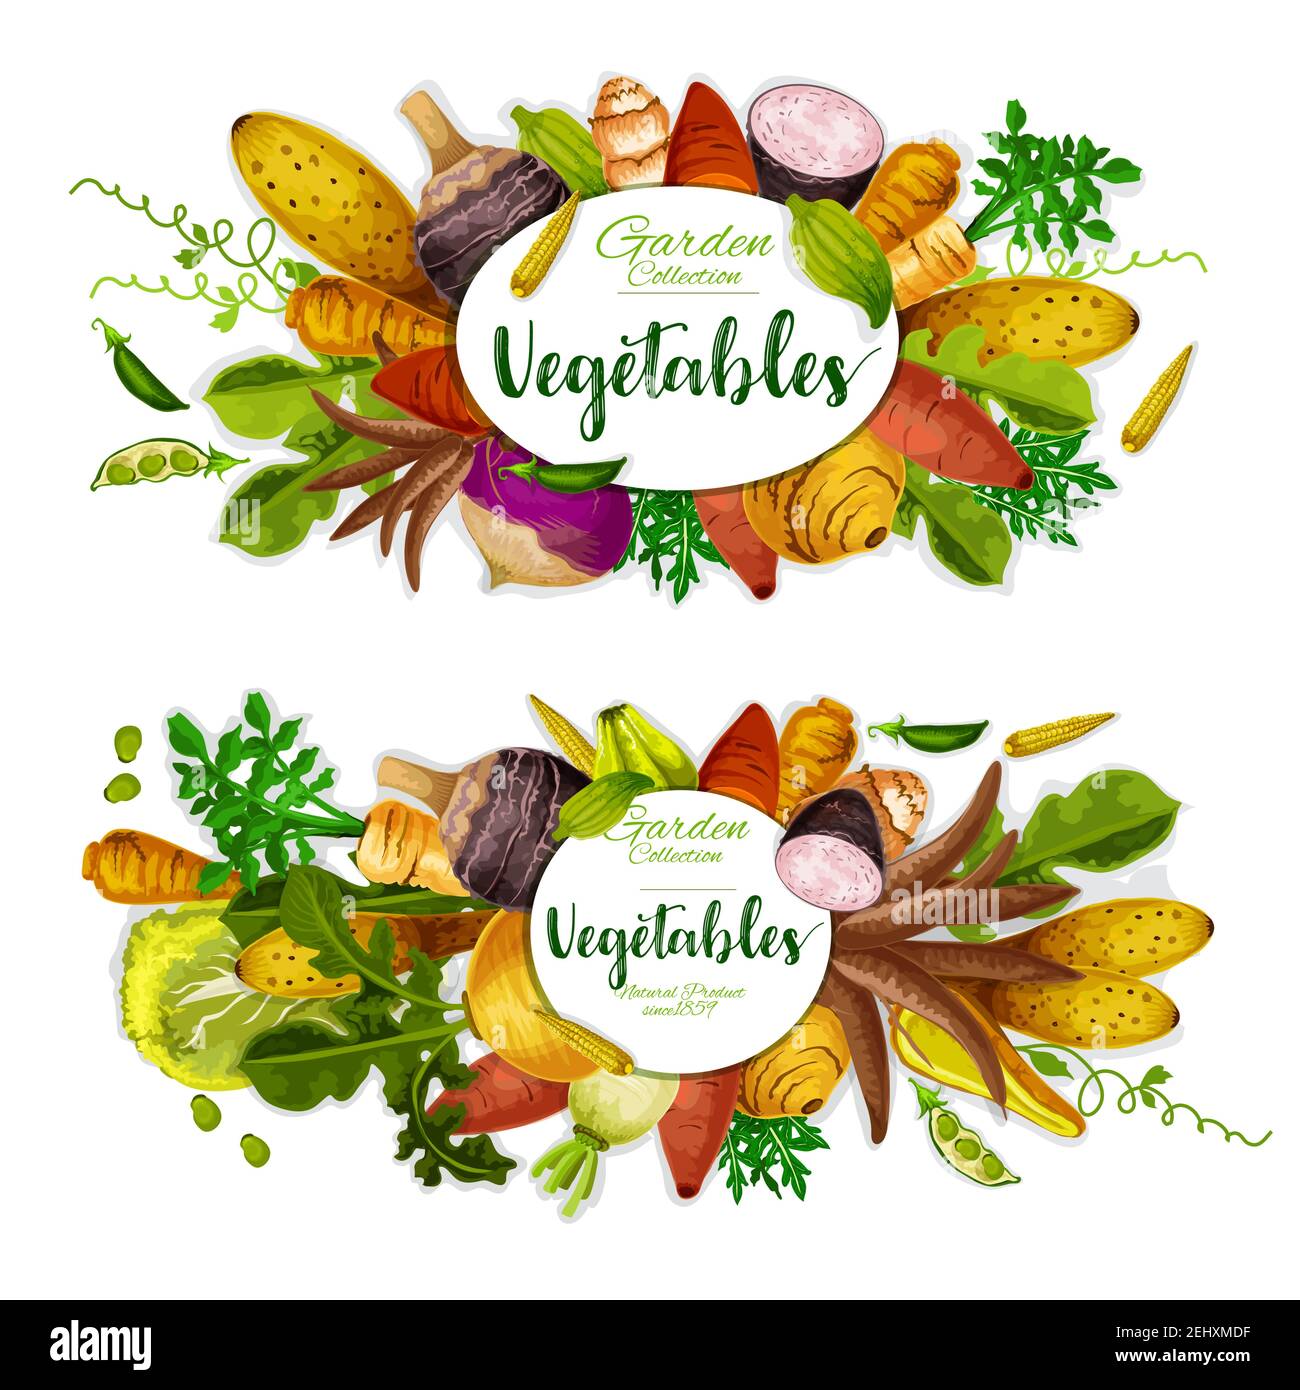 Exotic vegetables, beans and herbs with sweet potato, radish and corn, yam, celery and turnip, jerusalem artichoke, cassava and arracacia, cyclanthera Stock Vector